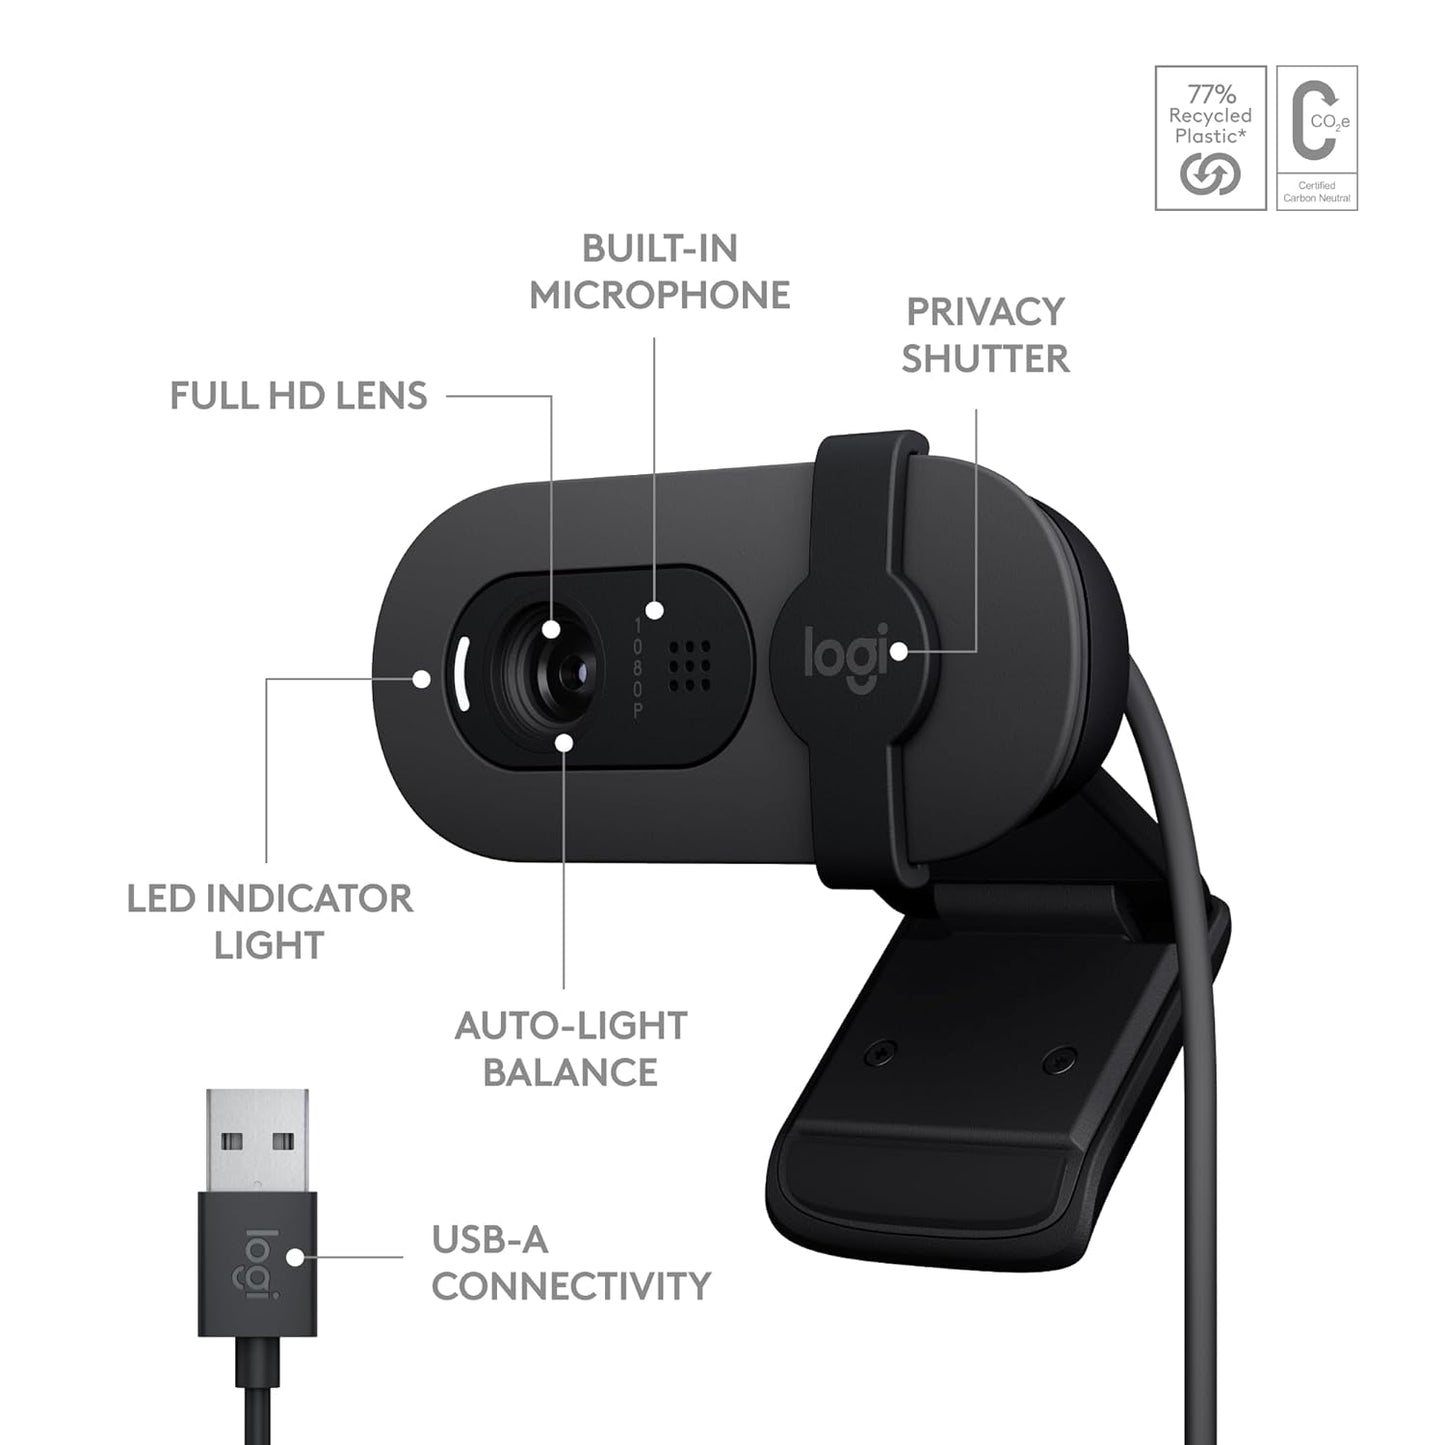 Logitech Brio 100 Full HD Webcam for Meetings and Streaming, Auto-Light Balance, Built-in Mic, Privacy Shutter, USB-A, for Microsoft Teams, Google Meet, Zoom and More- Graphite-Webcam-Logitech-computerspace